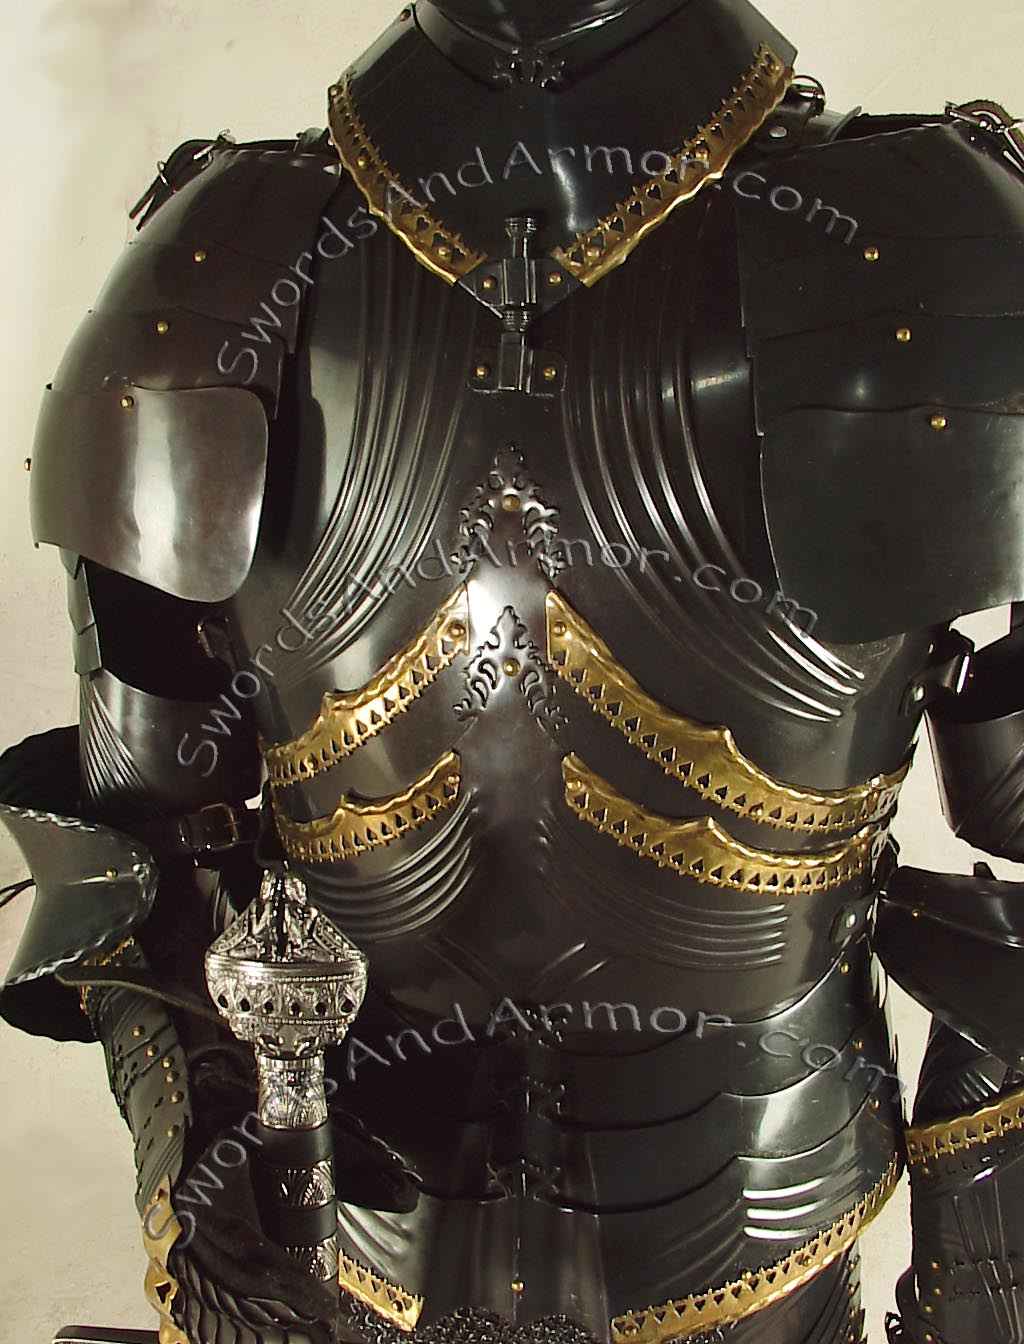 High Gothic Armour - Age of Armour  Suit of armor, Medieval armor, Armor